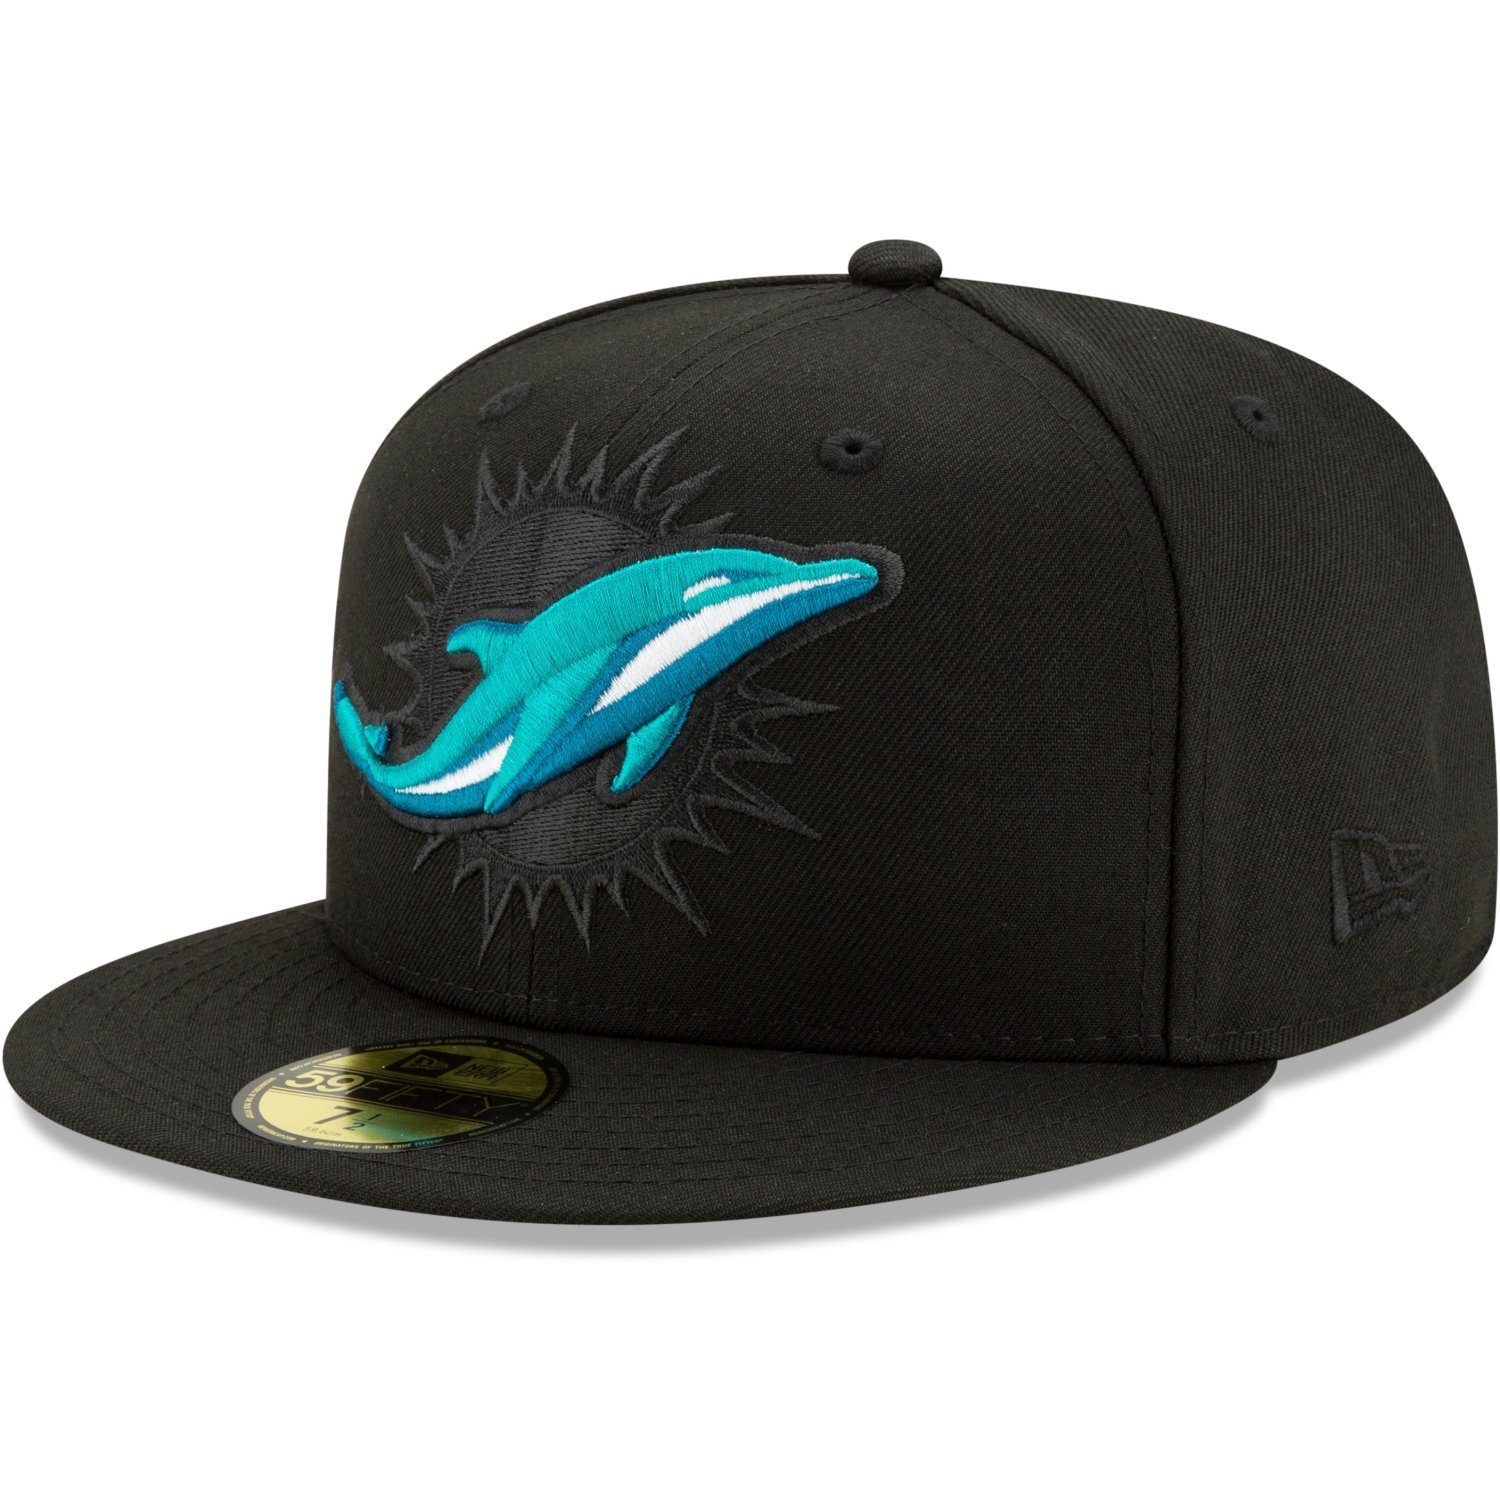 Miami New NFL 59Fifty Era Fitted ELEMENTS 2.0 Dolphins Cap